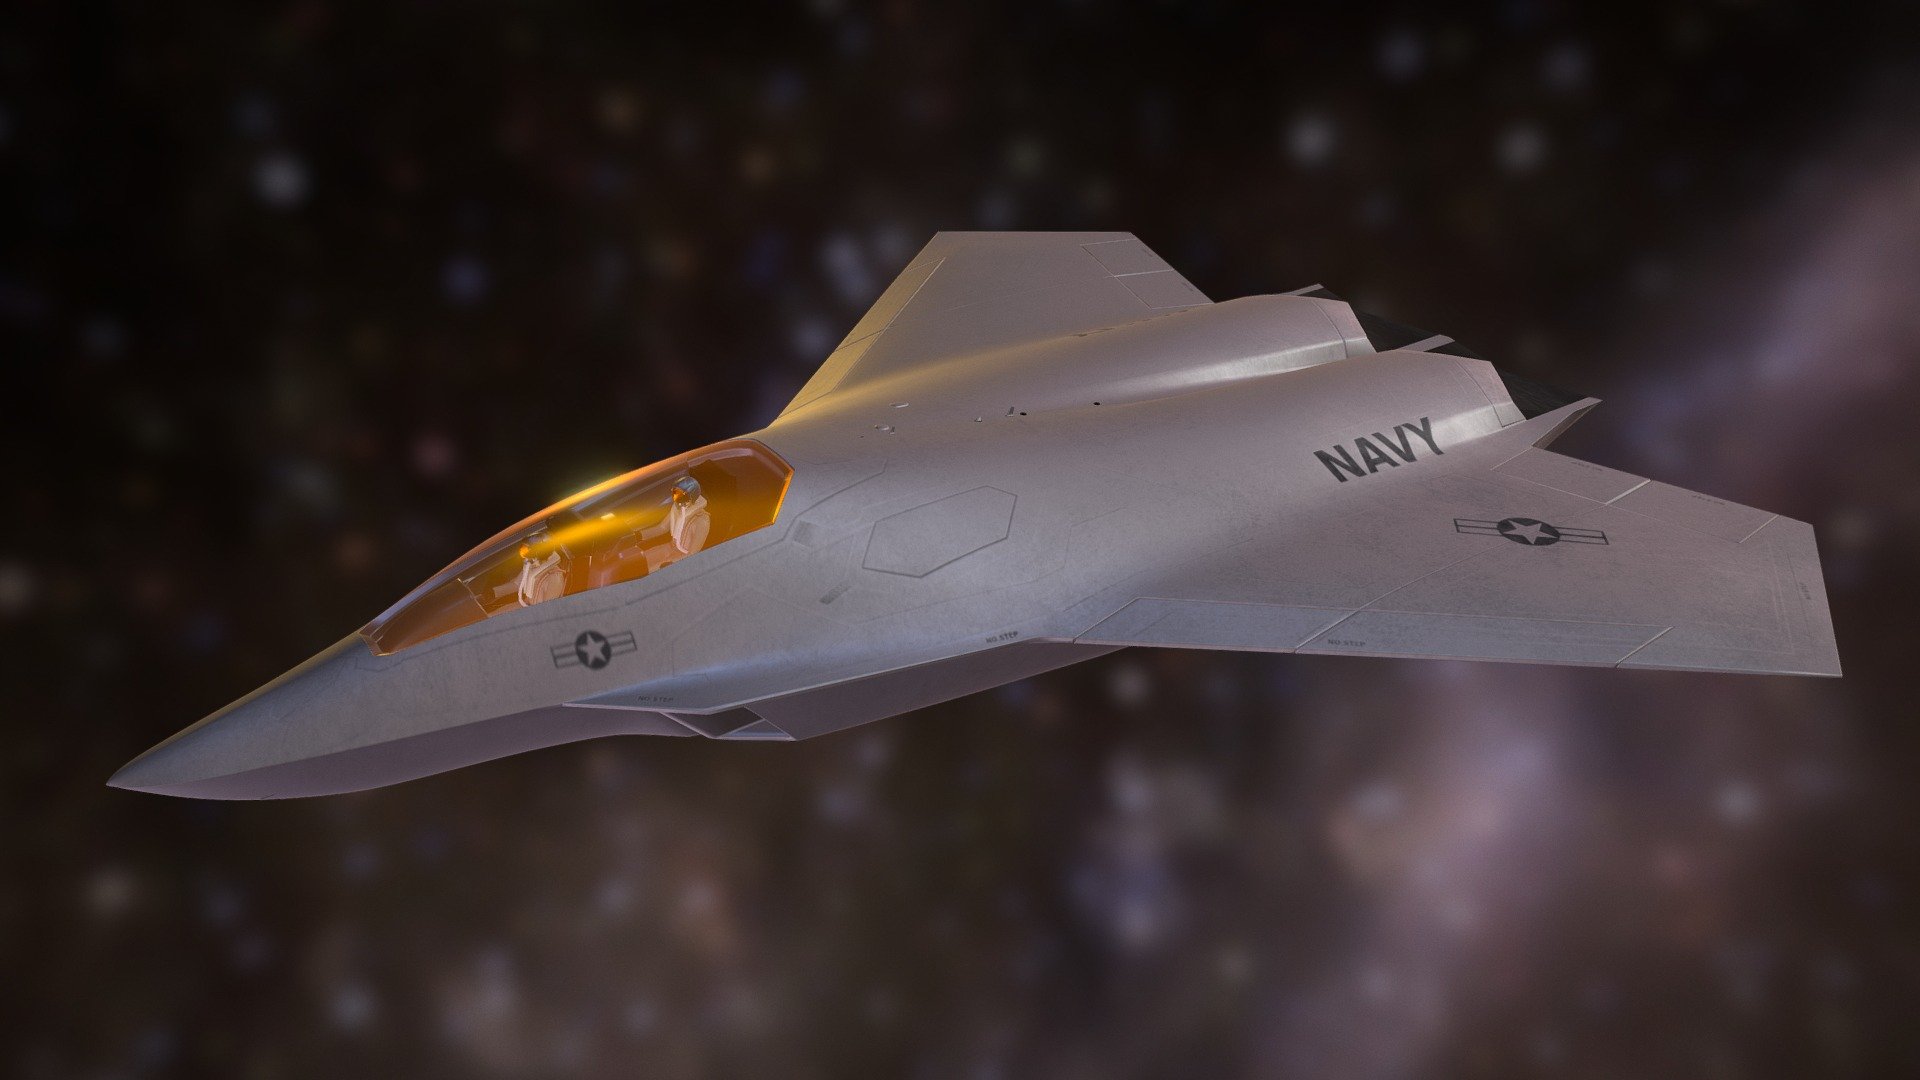 This is a model of Boeing's F/A-XX. It was Boeing's proposal for NGAD (Next Gen Air Dominance). None were ever produced. I made this model for FlightGear, an open source flight sim. It runs in the sim and is fun to fly - Boeing F/A-XX - 3D model by AndyEtron 3d model